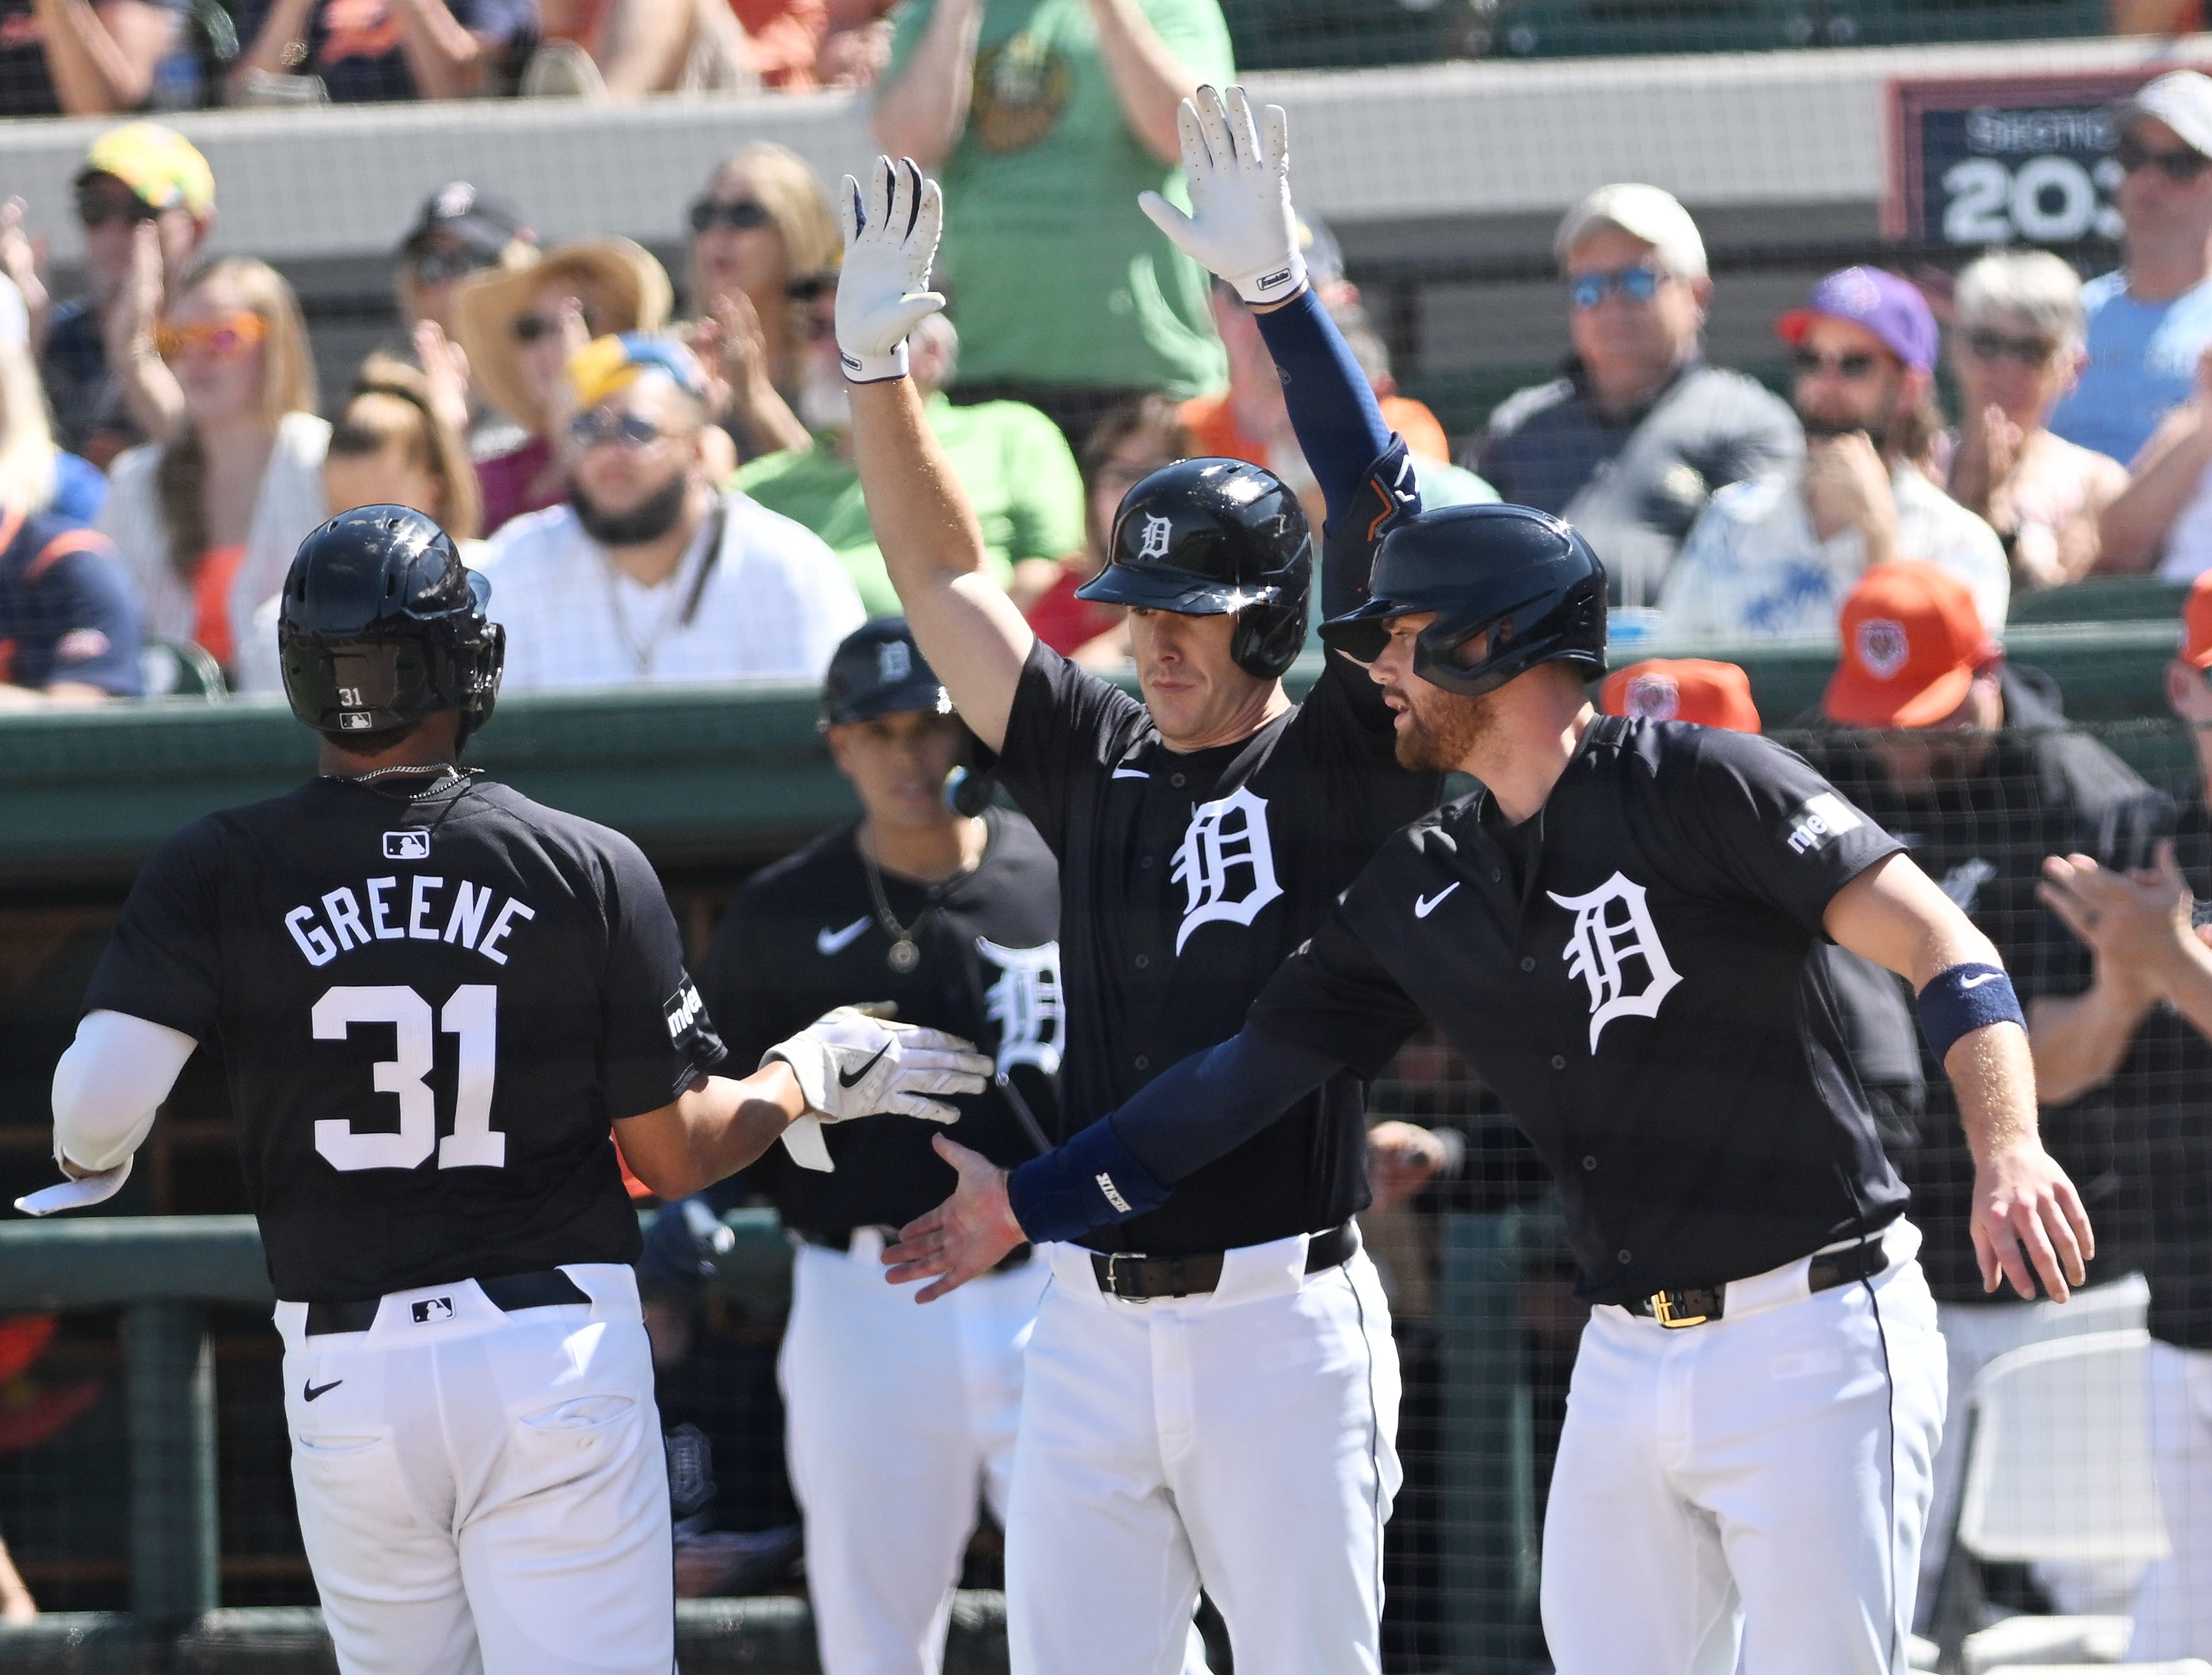 Go through the gallery to view the 20234 Detroit Tigers, with analysis from Chris McCosky of The Detroit News.